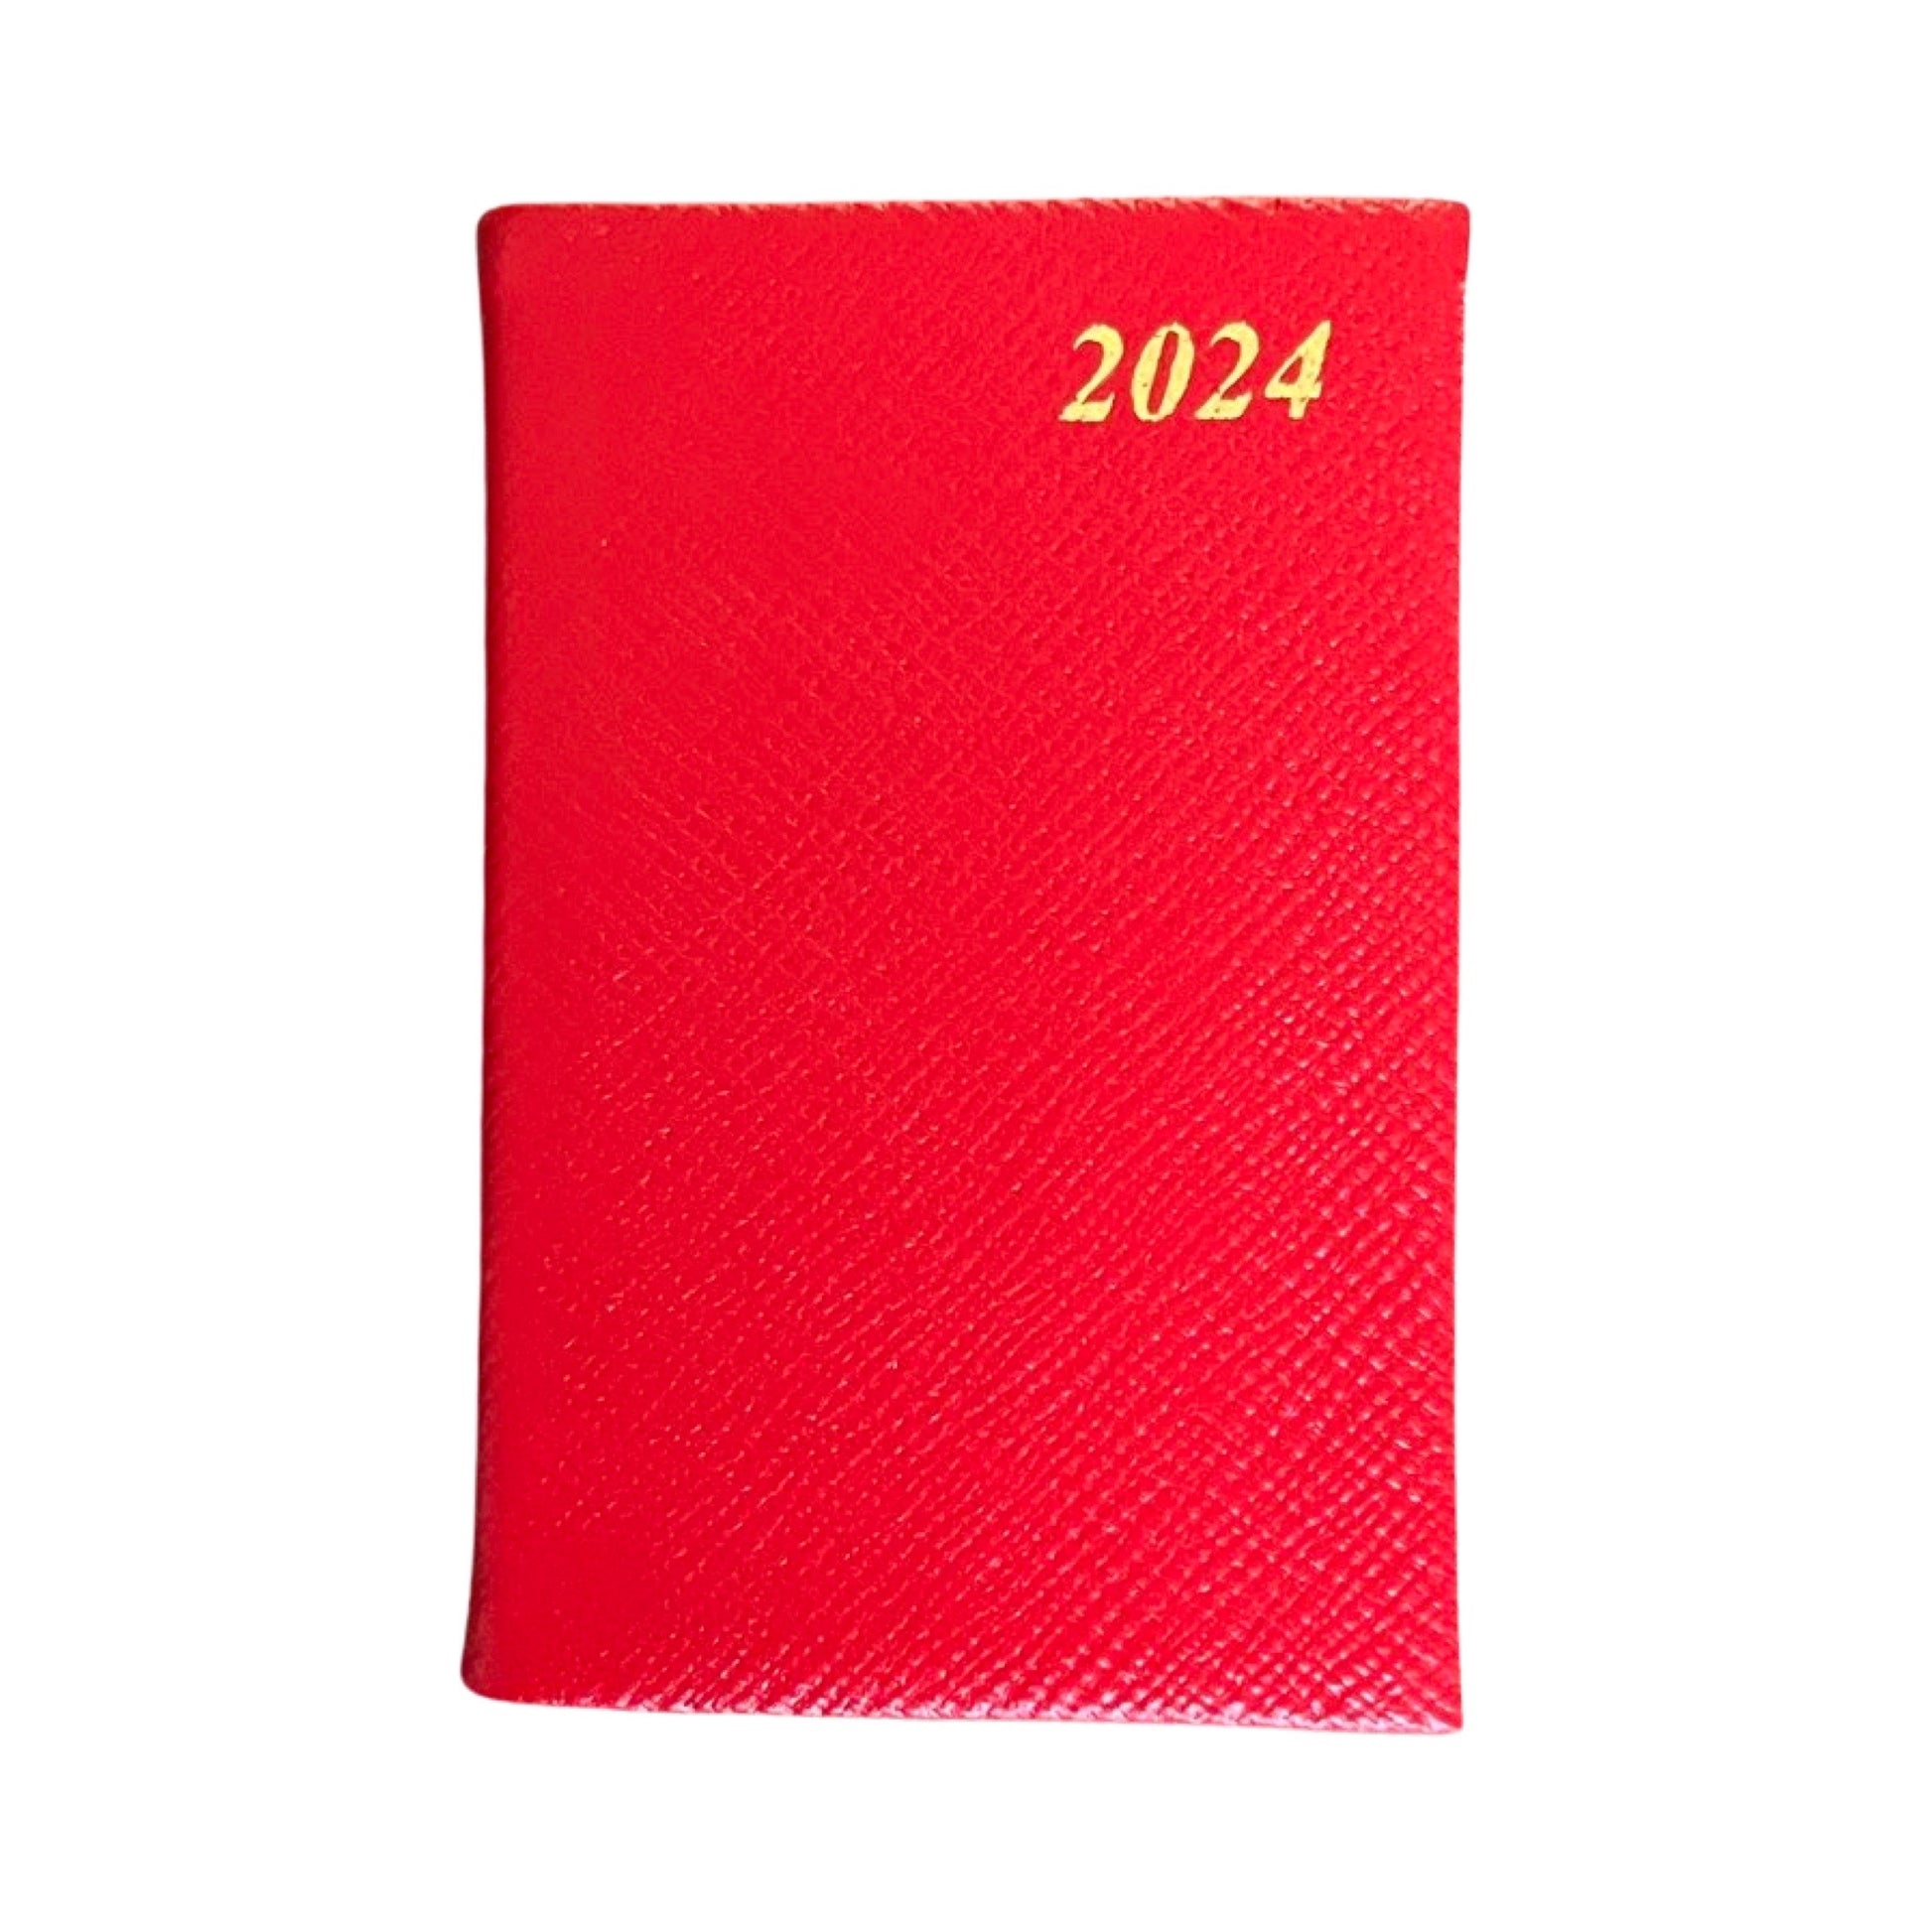 Charing Cross, 2023 Leather Planner Calendar with Pencil and Clip Calendar